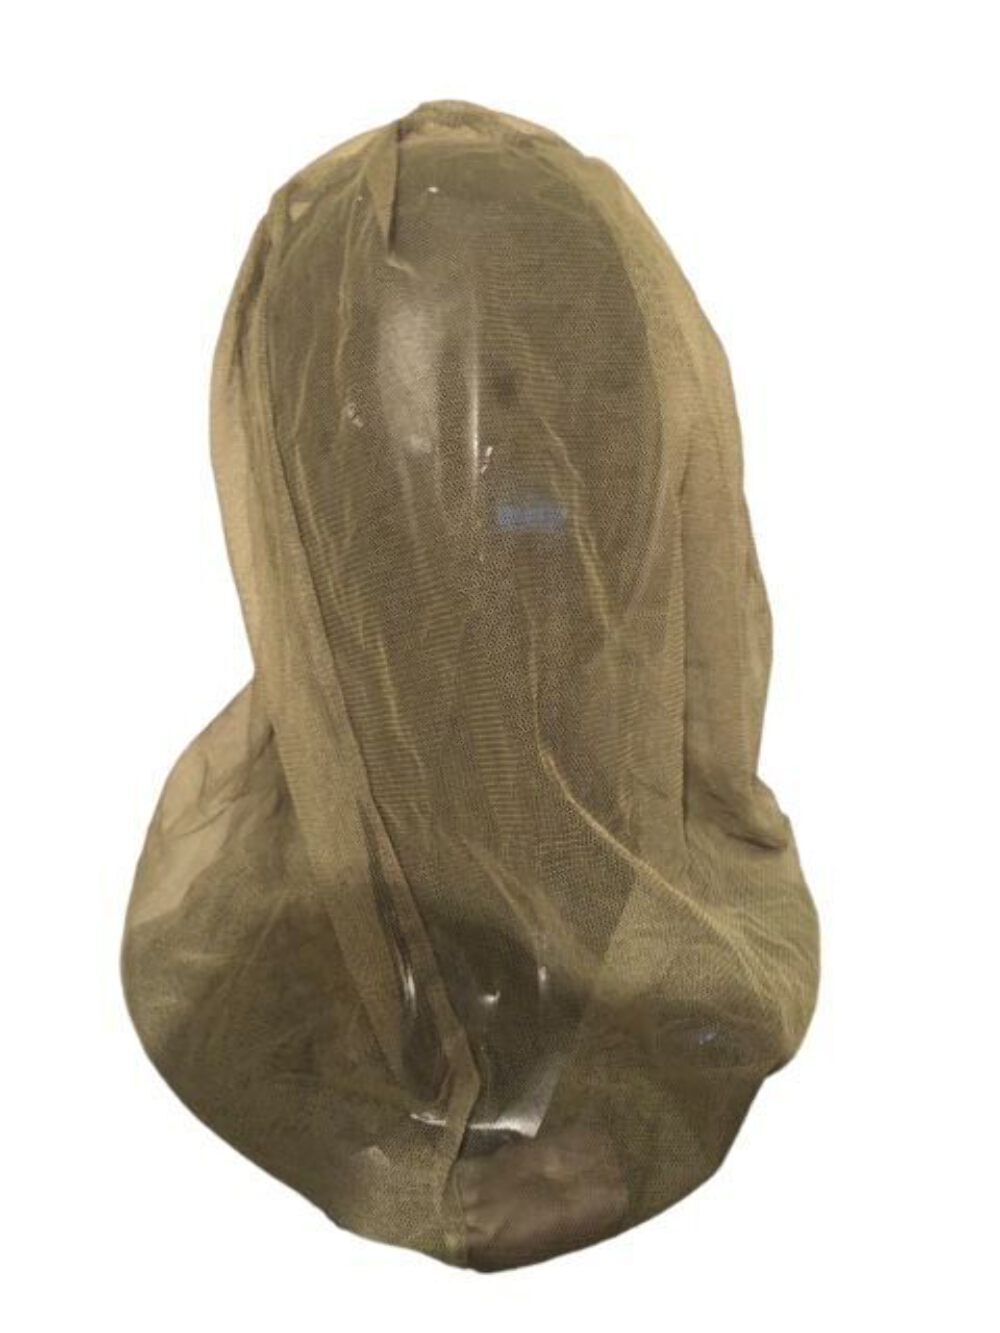 British Army olive green mosquito head net